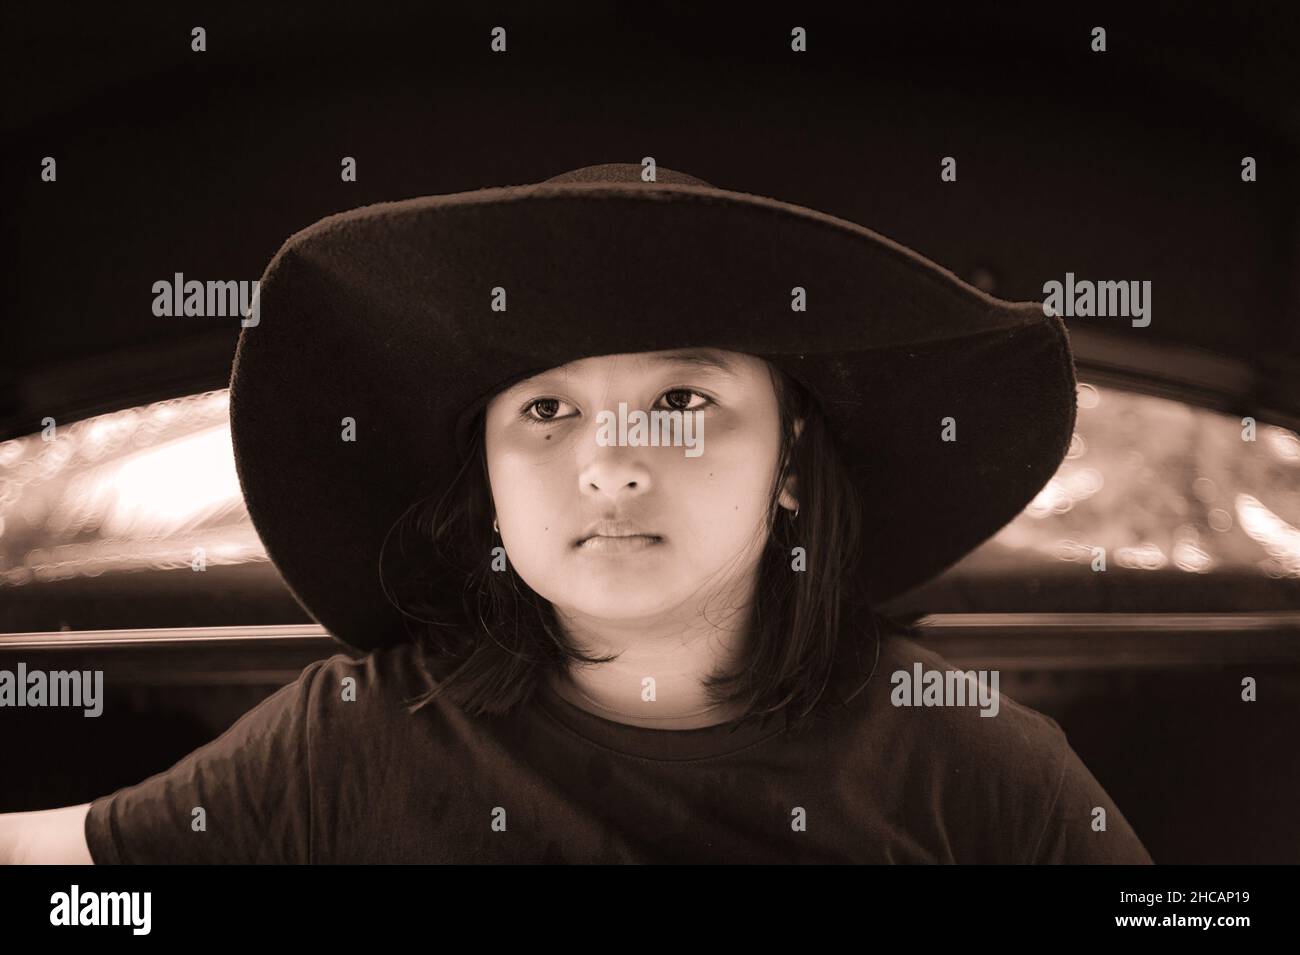 Young girl sitting on black car trunk  wearing black hat and black t shirt. Stock Photo